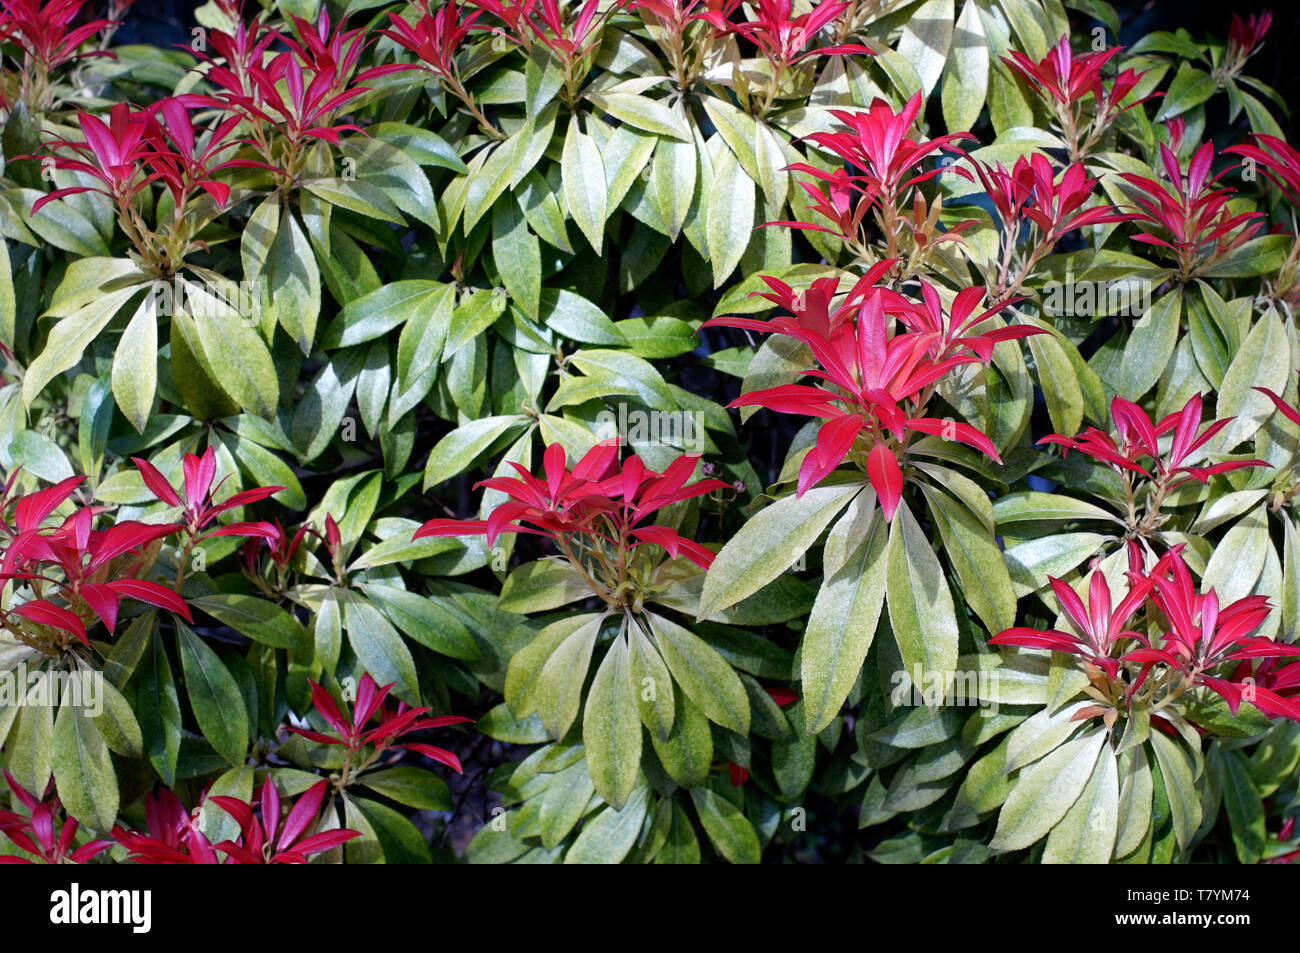 Closeup of a Pieris formosa bush with green leaves and new red growth in spring, Vancouver, BC, Canada Stock Photo